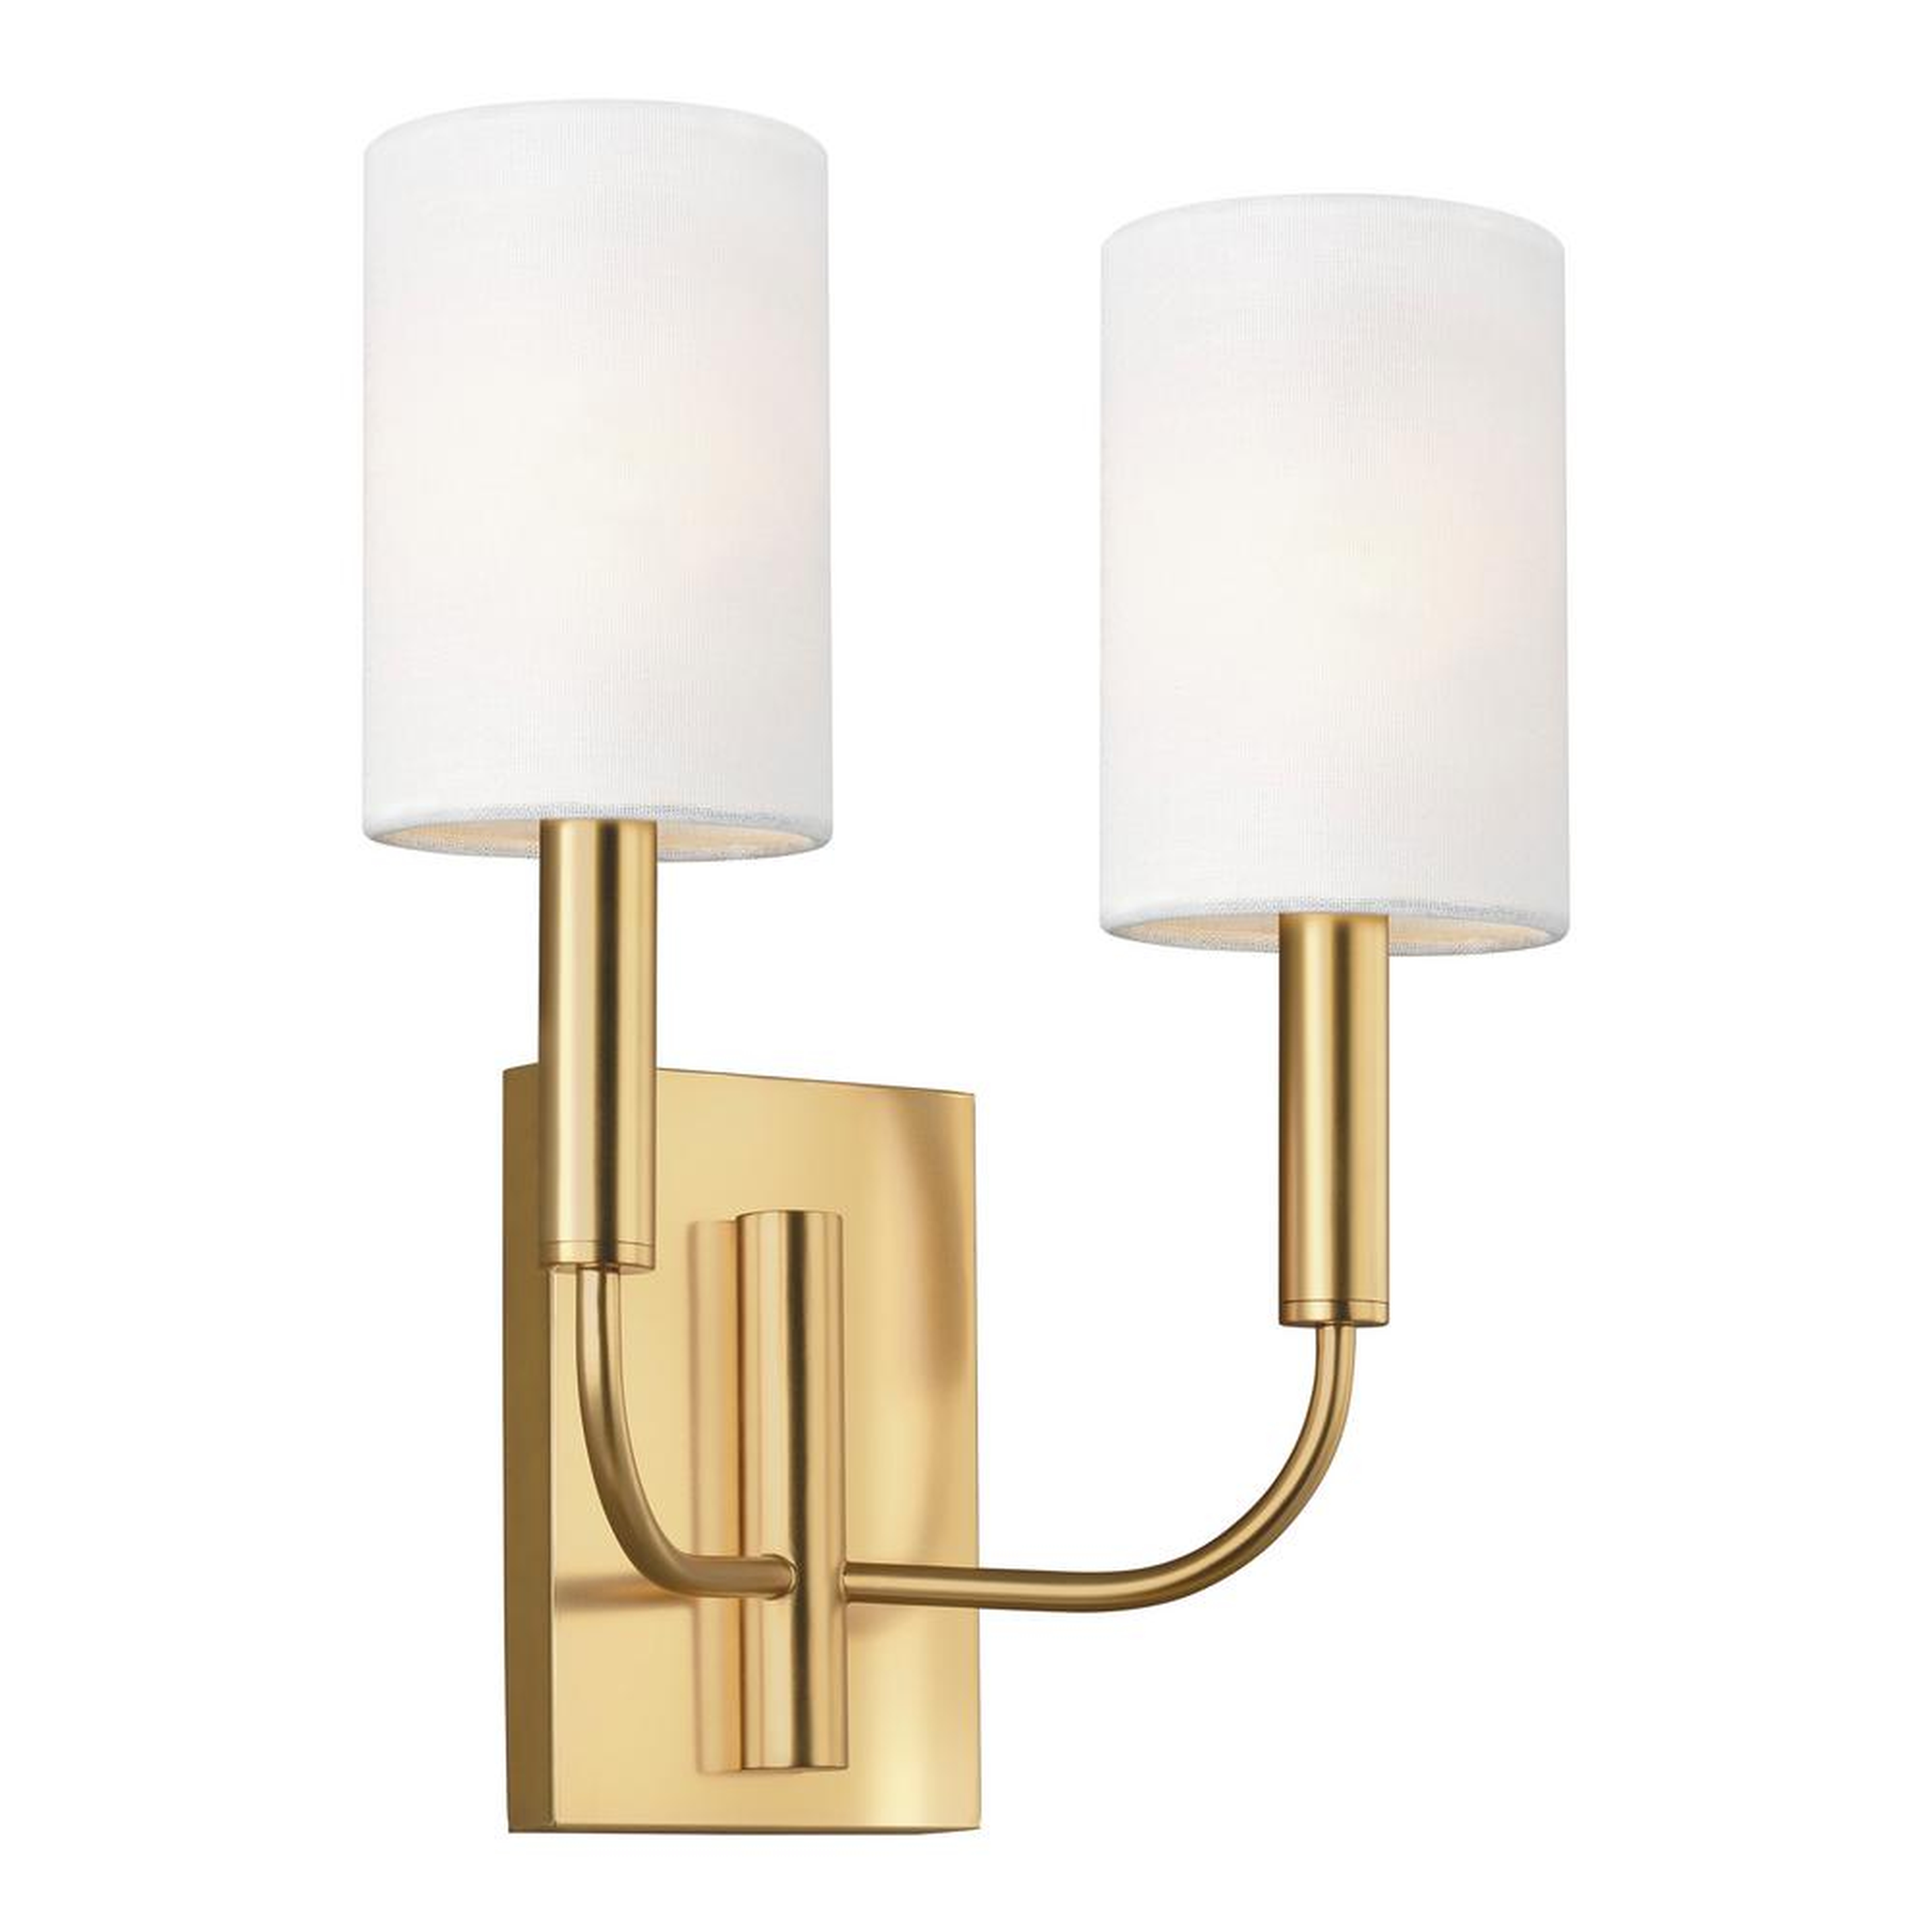 ED Ellen DeGeneres Crafted by Generation Lighting Brianna 11.375 in. W 2-Light Burnished Brass Sconce with White Shades - Home Depot